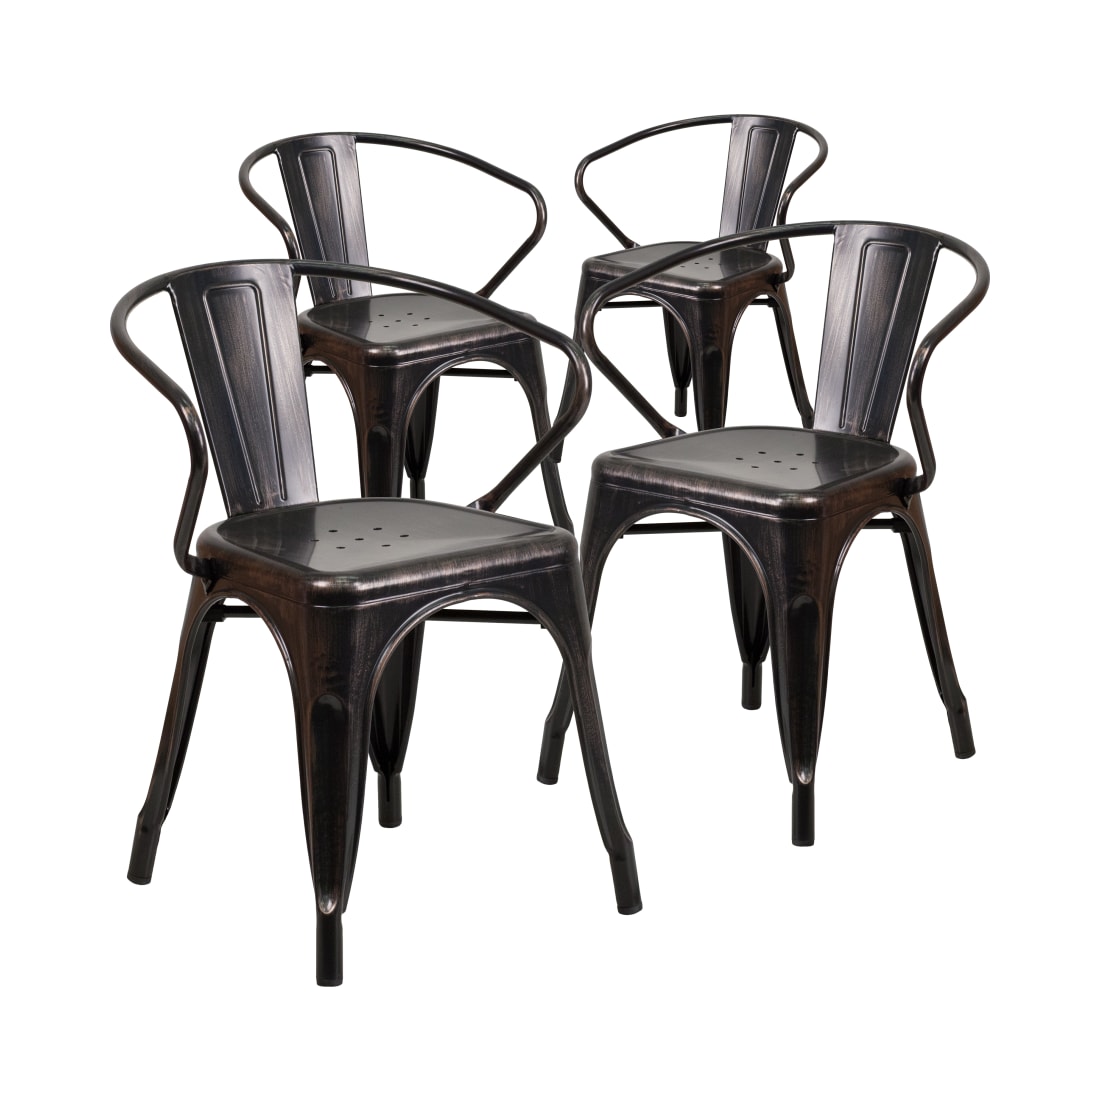 4 Pack Black-Antique Gold Metal Indoor-Outdoor Chair with Arms